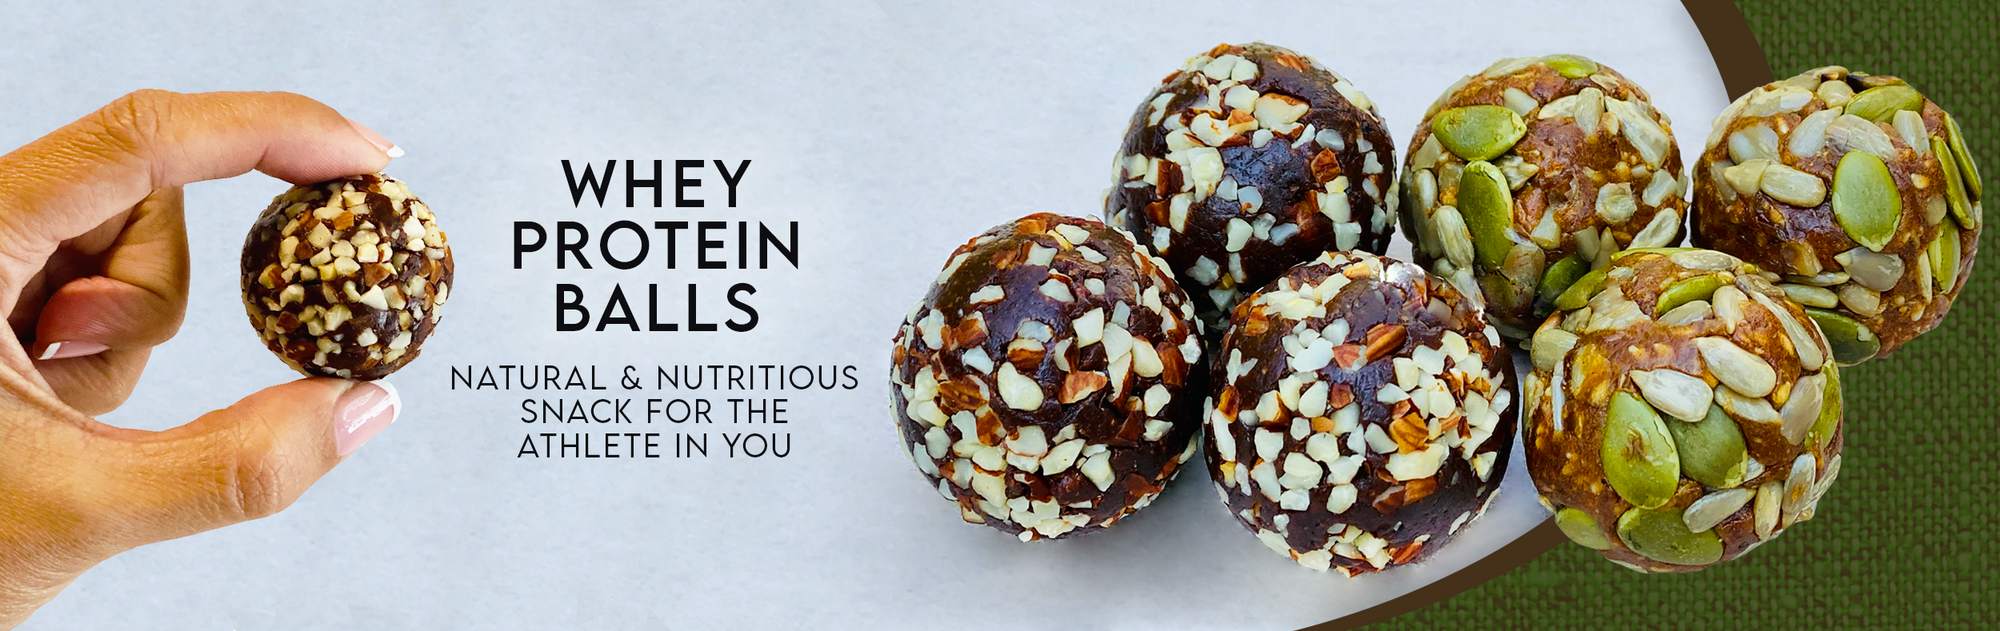 Whey Protein Balls - Natural & Nutricious Snack for the Athlete in you